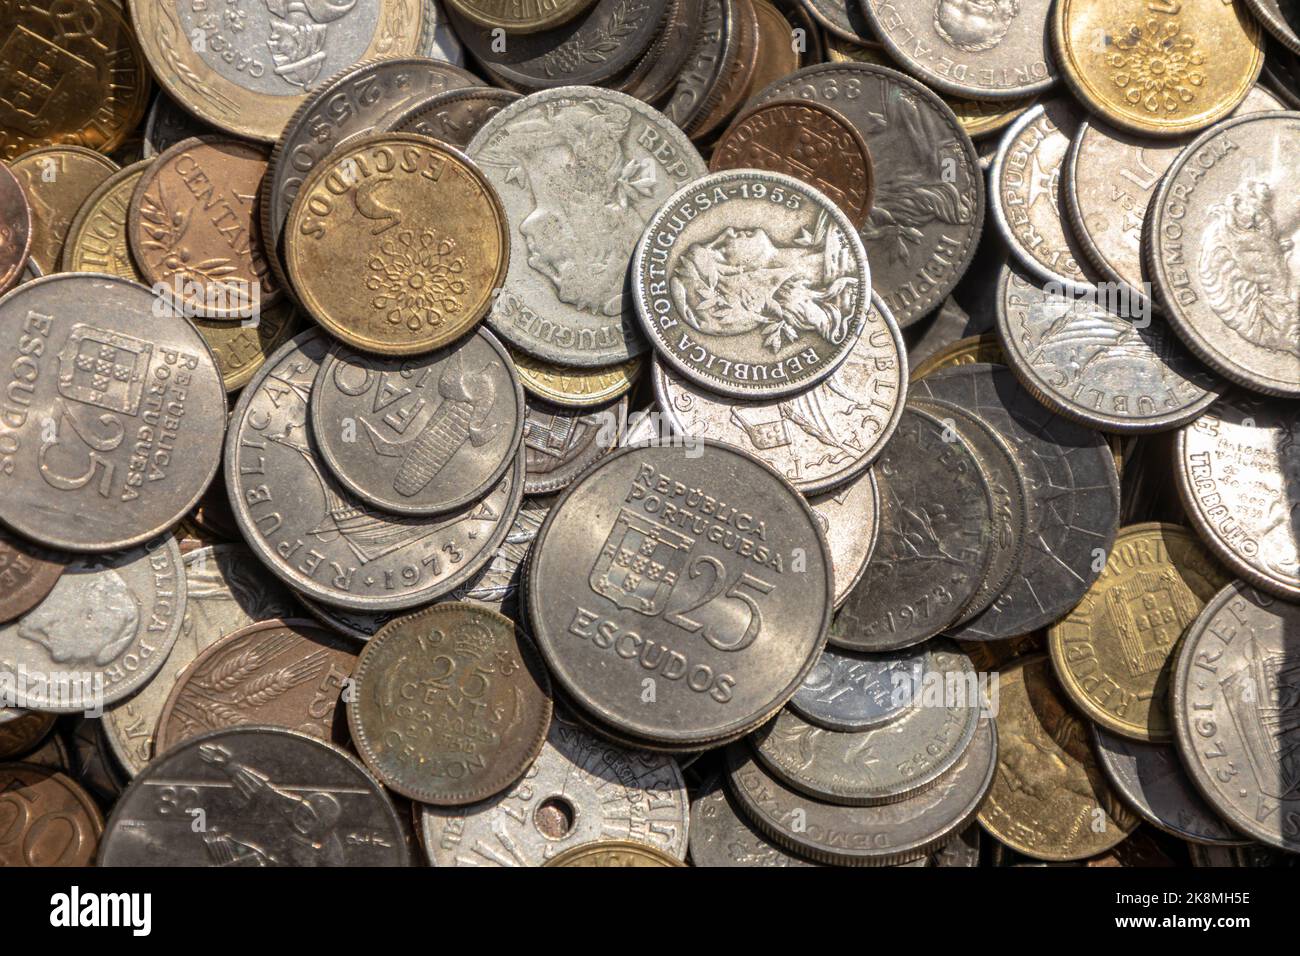 Group of ancient coins. Metallic money in the form of coins out of circulation. Stock Photo